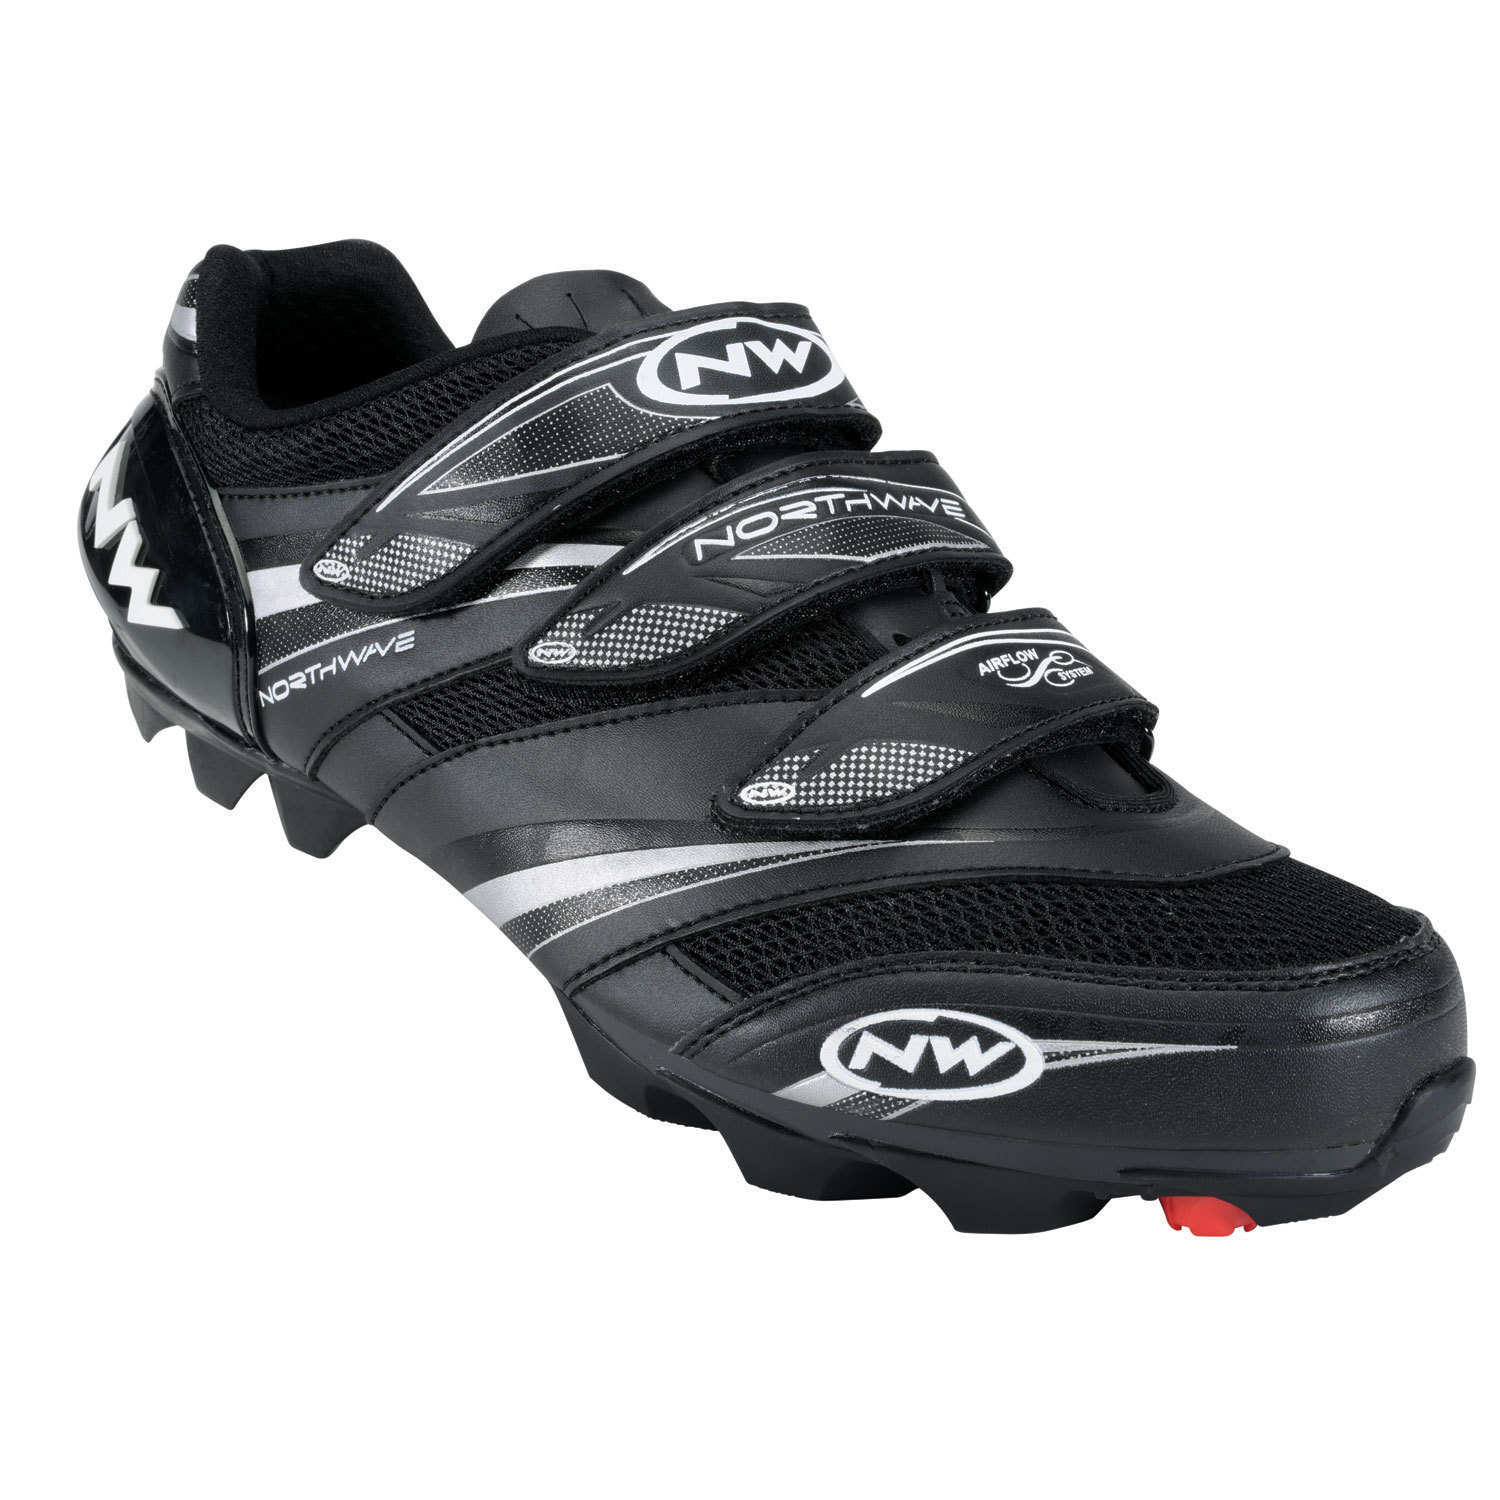 Northwave Lizzard Pro Mountain Cycling Shoes Black Size 42